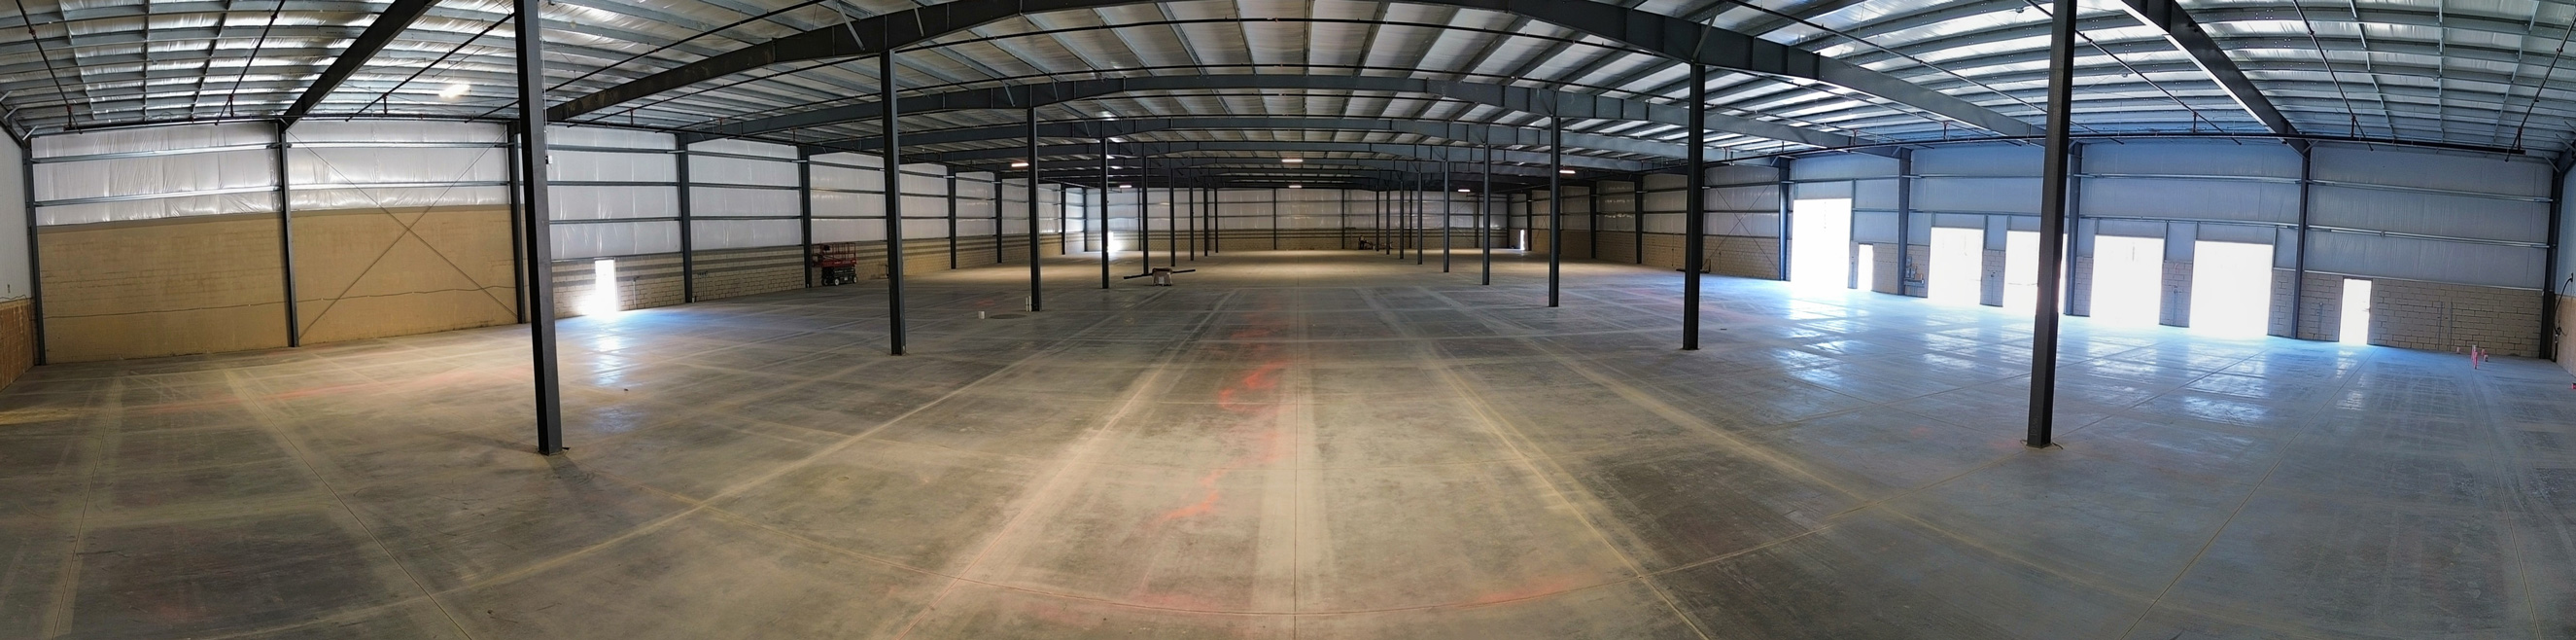 Concrete Floor at LayerZero Power Systems HQ